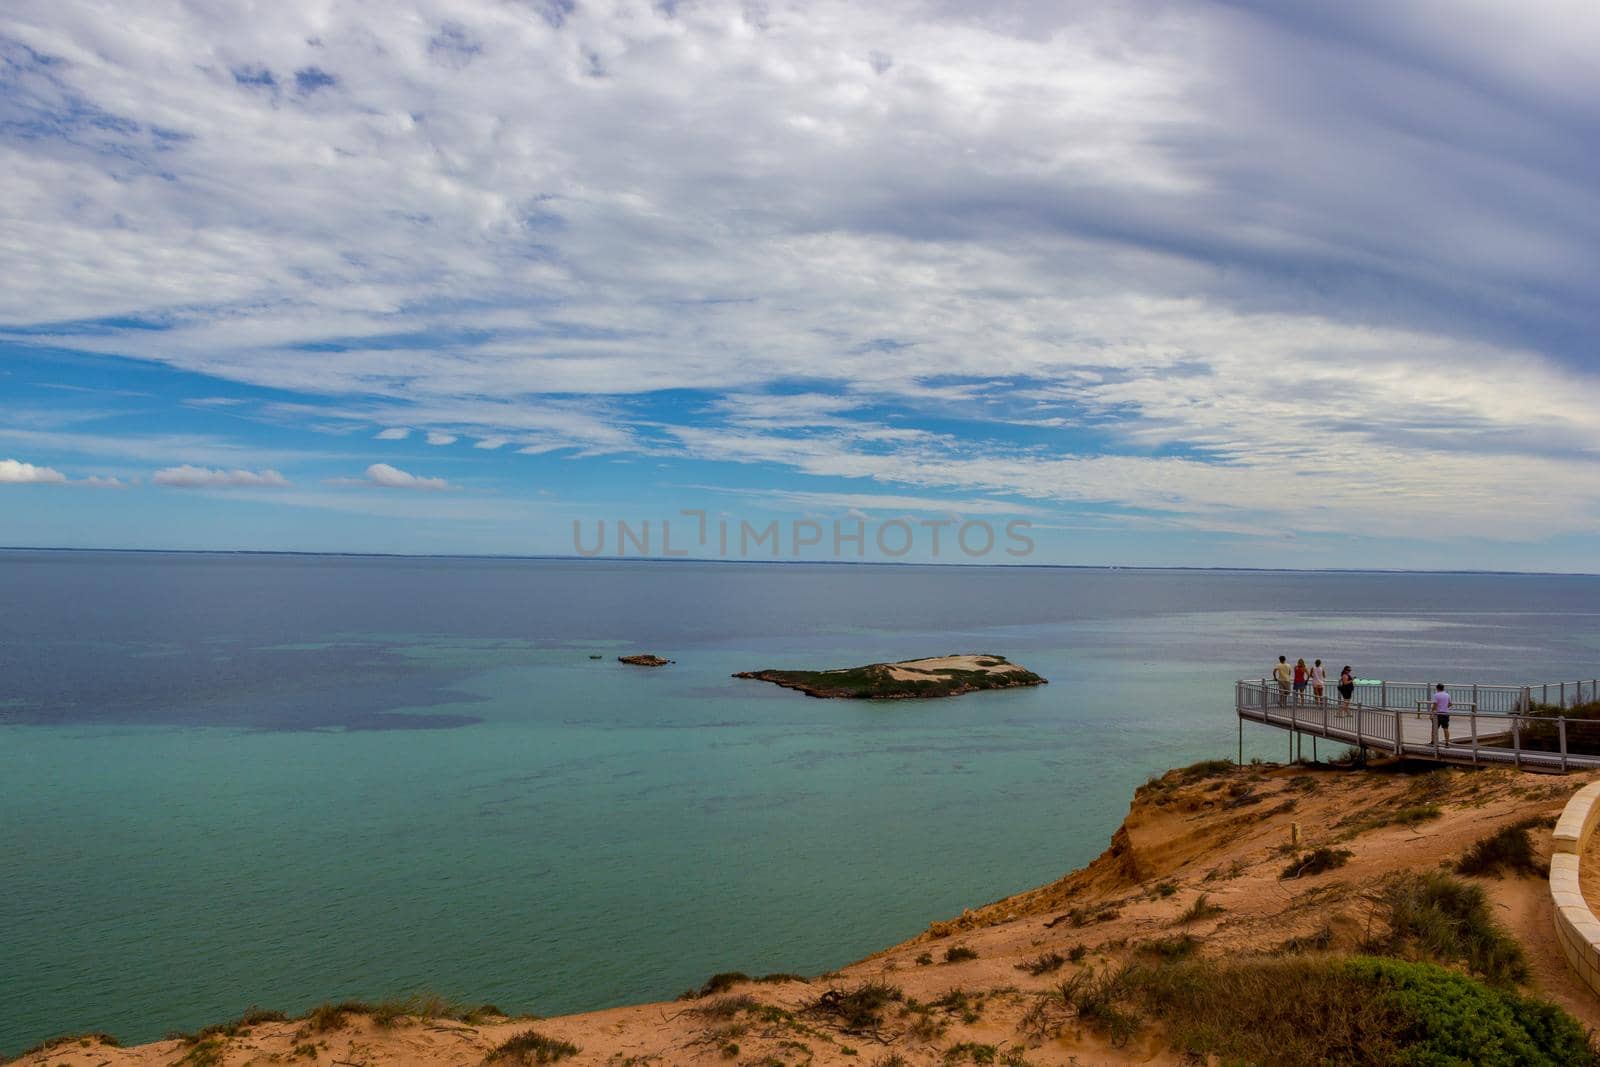 a Group of tourists at a Lookout platform in Monkey Mia, Western Australia. Caucasian girl enjoying cliffs of Indian Ocean coastline. by bettercallcurry